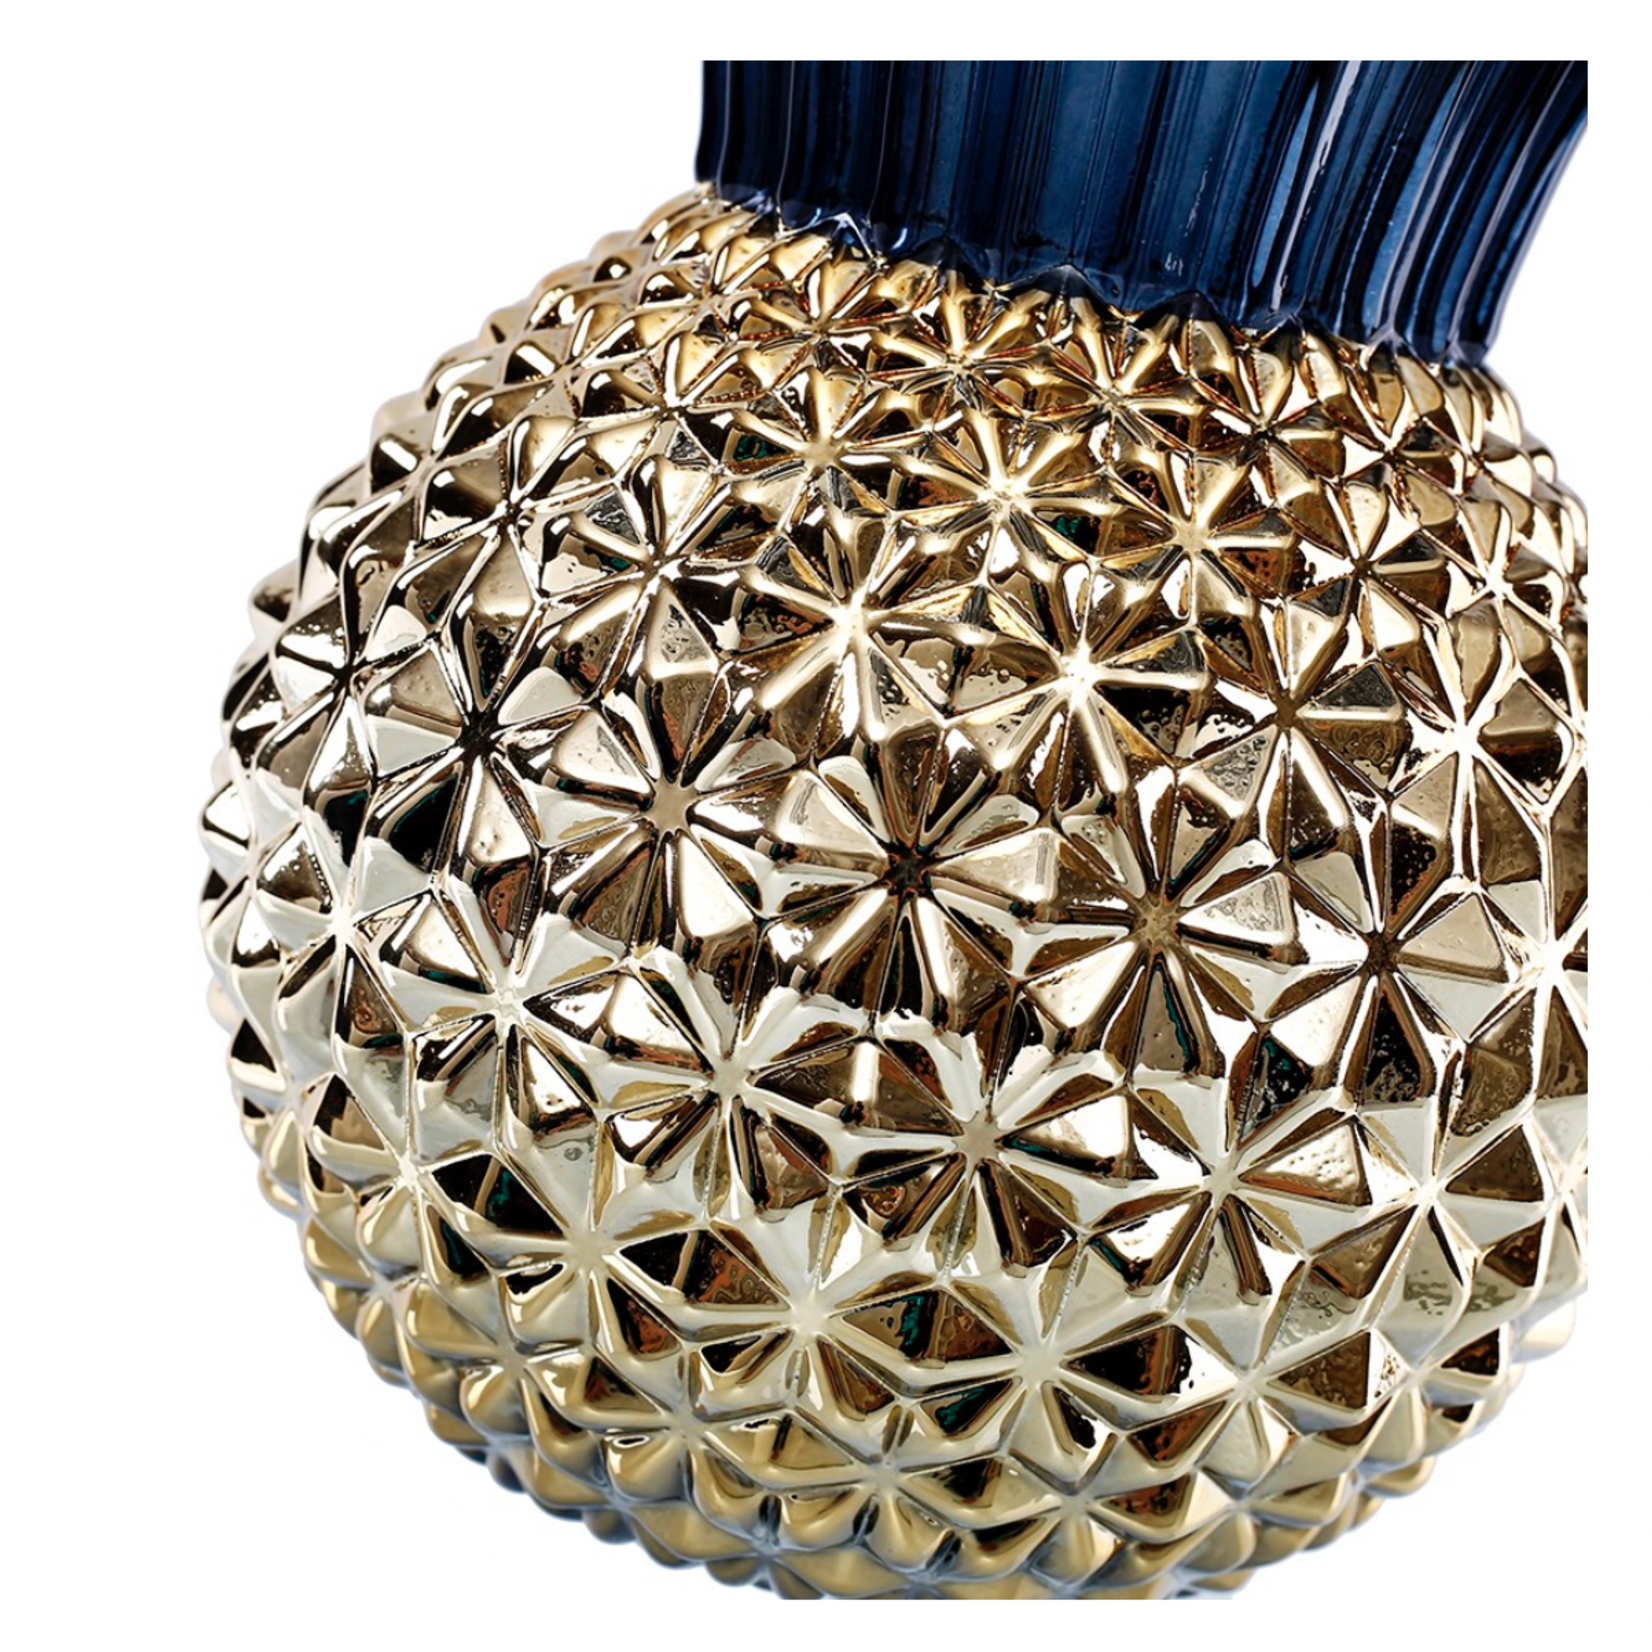 10.75”h x 8” GOLD PINEAPPLE W/ BLUE TOP